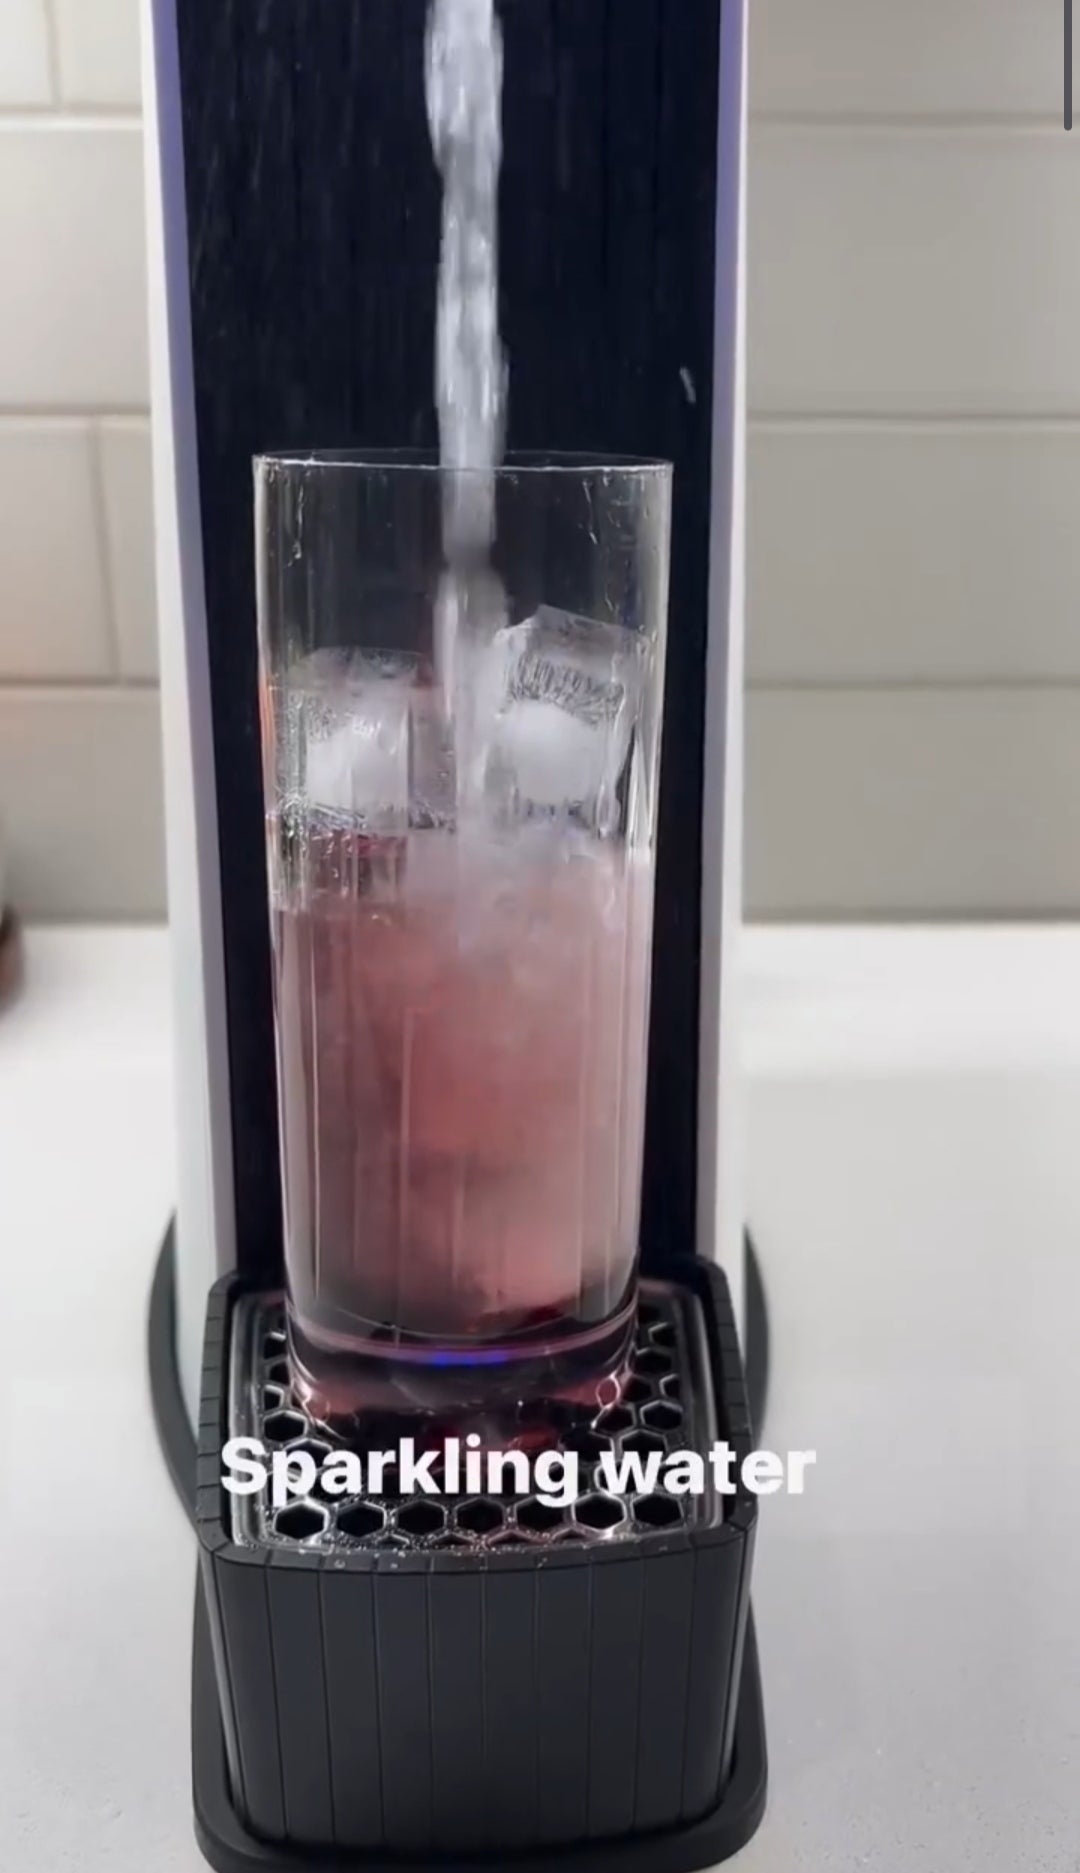 Sparkling water on demand is AWESOME!!